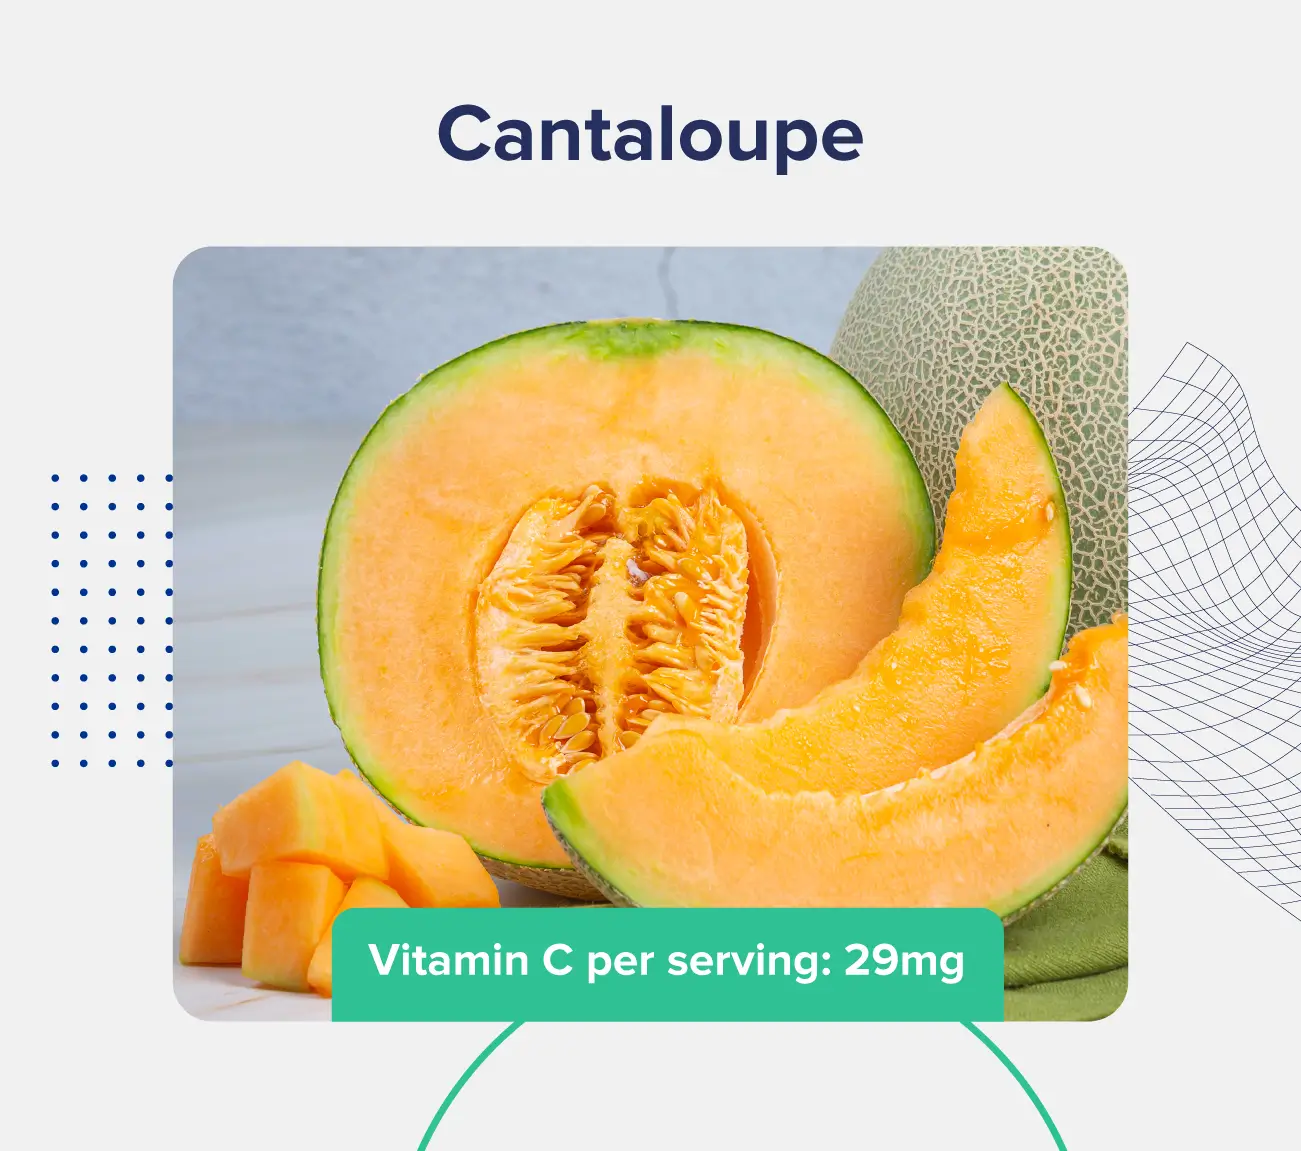 A graphic entitled "cantaloupe" depicting half of a cantaloupe alongside some slices, alongside a description of the vitamin C content (29 milligrams per serving). 